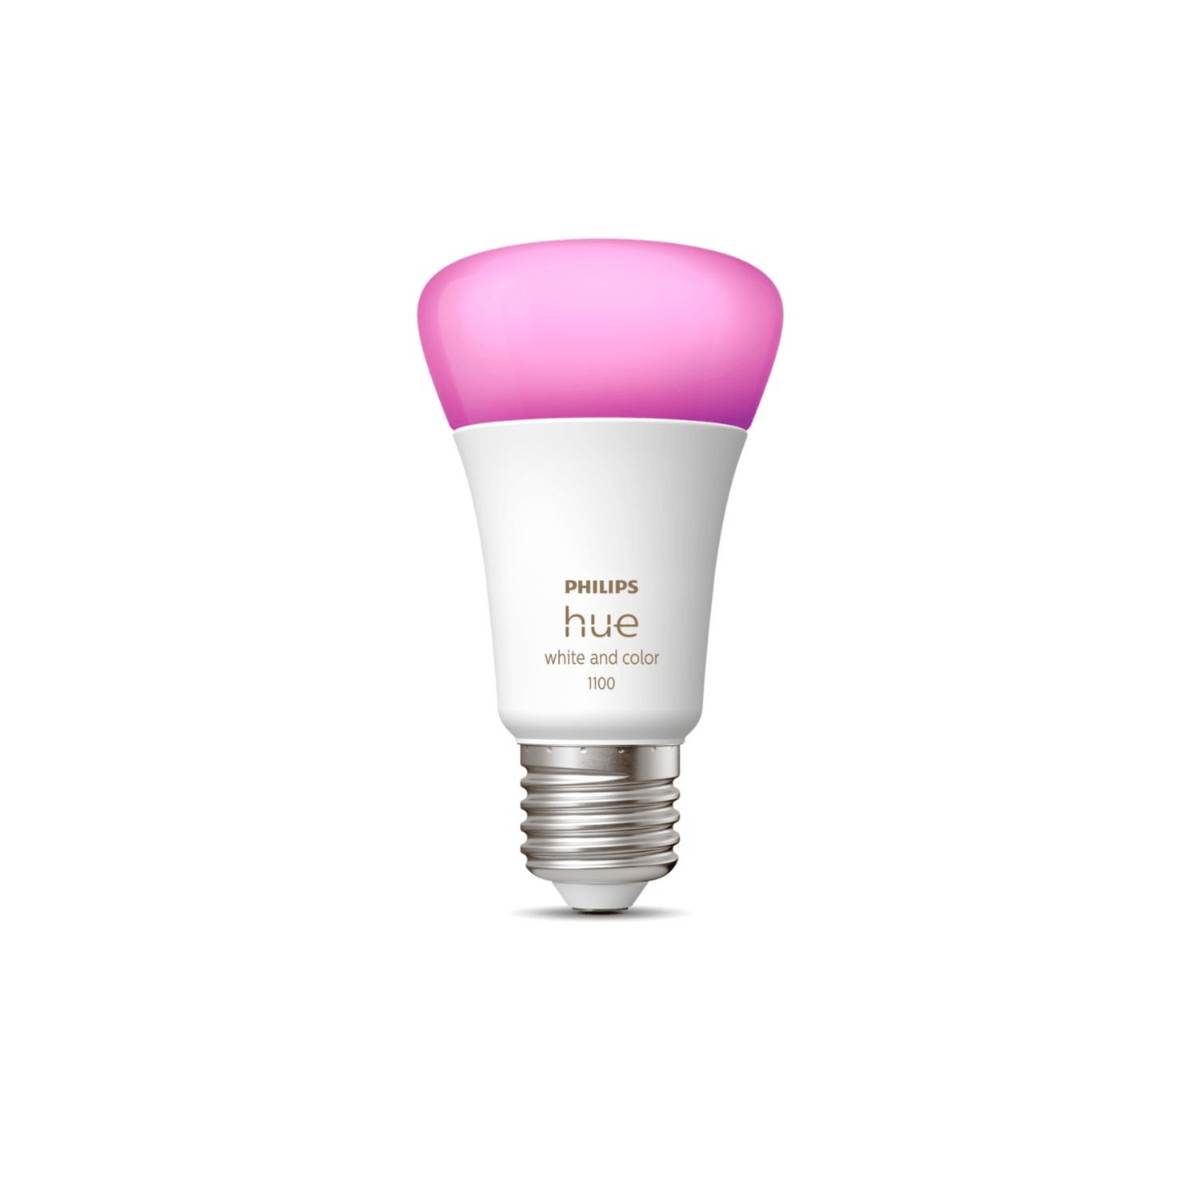 800lm your-smarthome Licht Color | | Ambiance E27 Home Onlineshop via | Lampe Leuchtmittel Sprache A60 E27 and | dimmbar Philips Dein App White RGBW Hue LED per Smart oder |